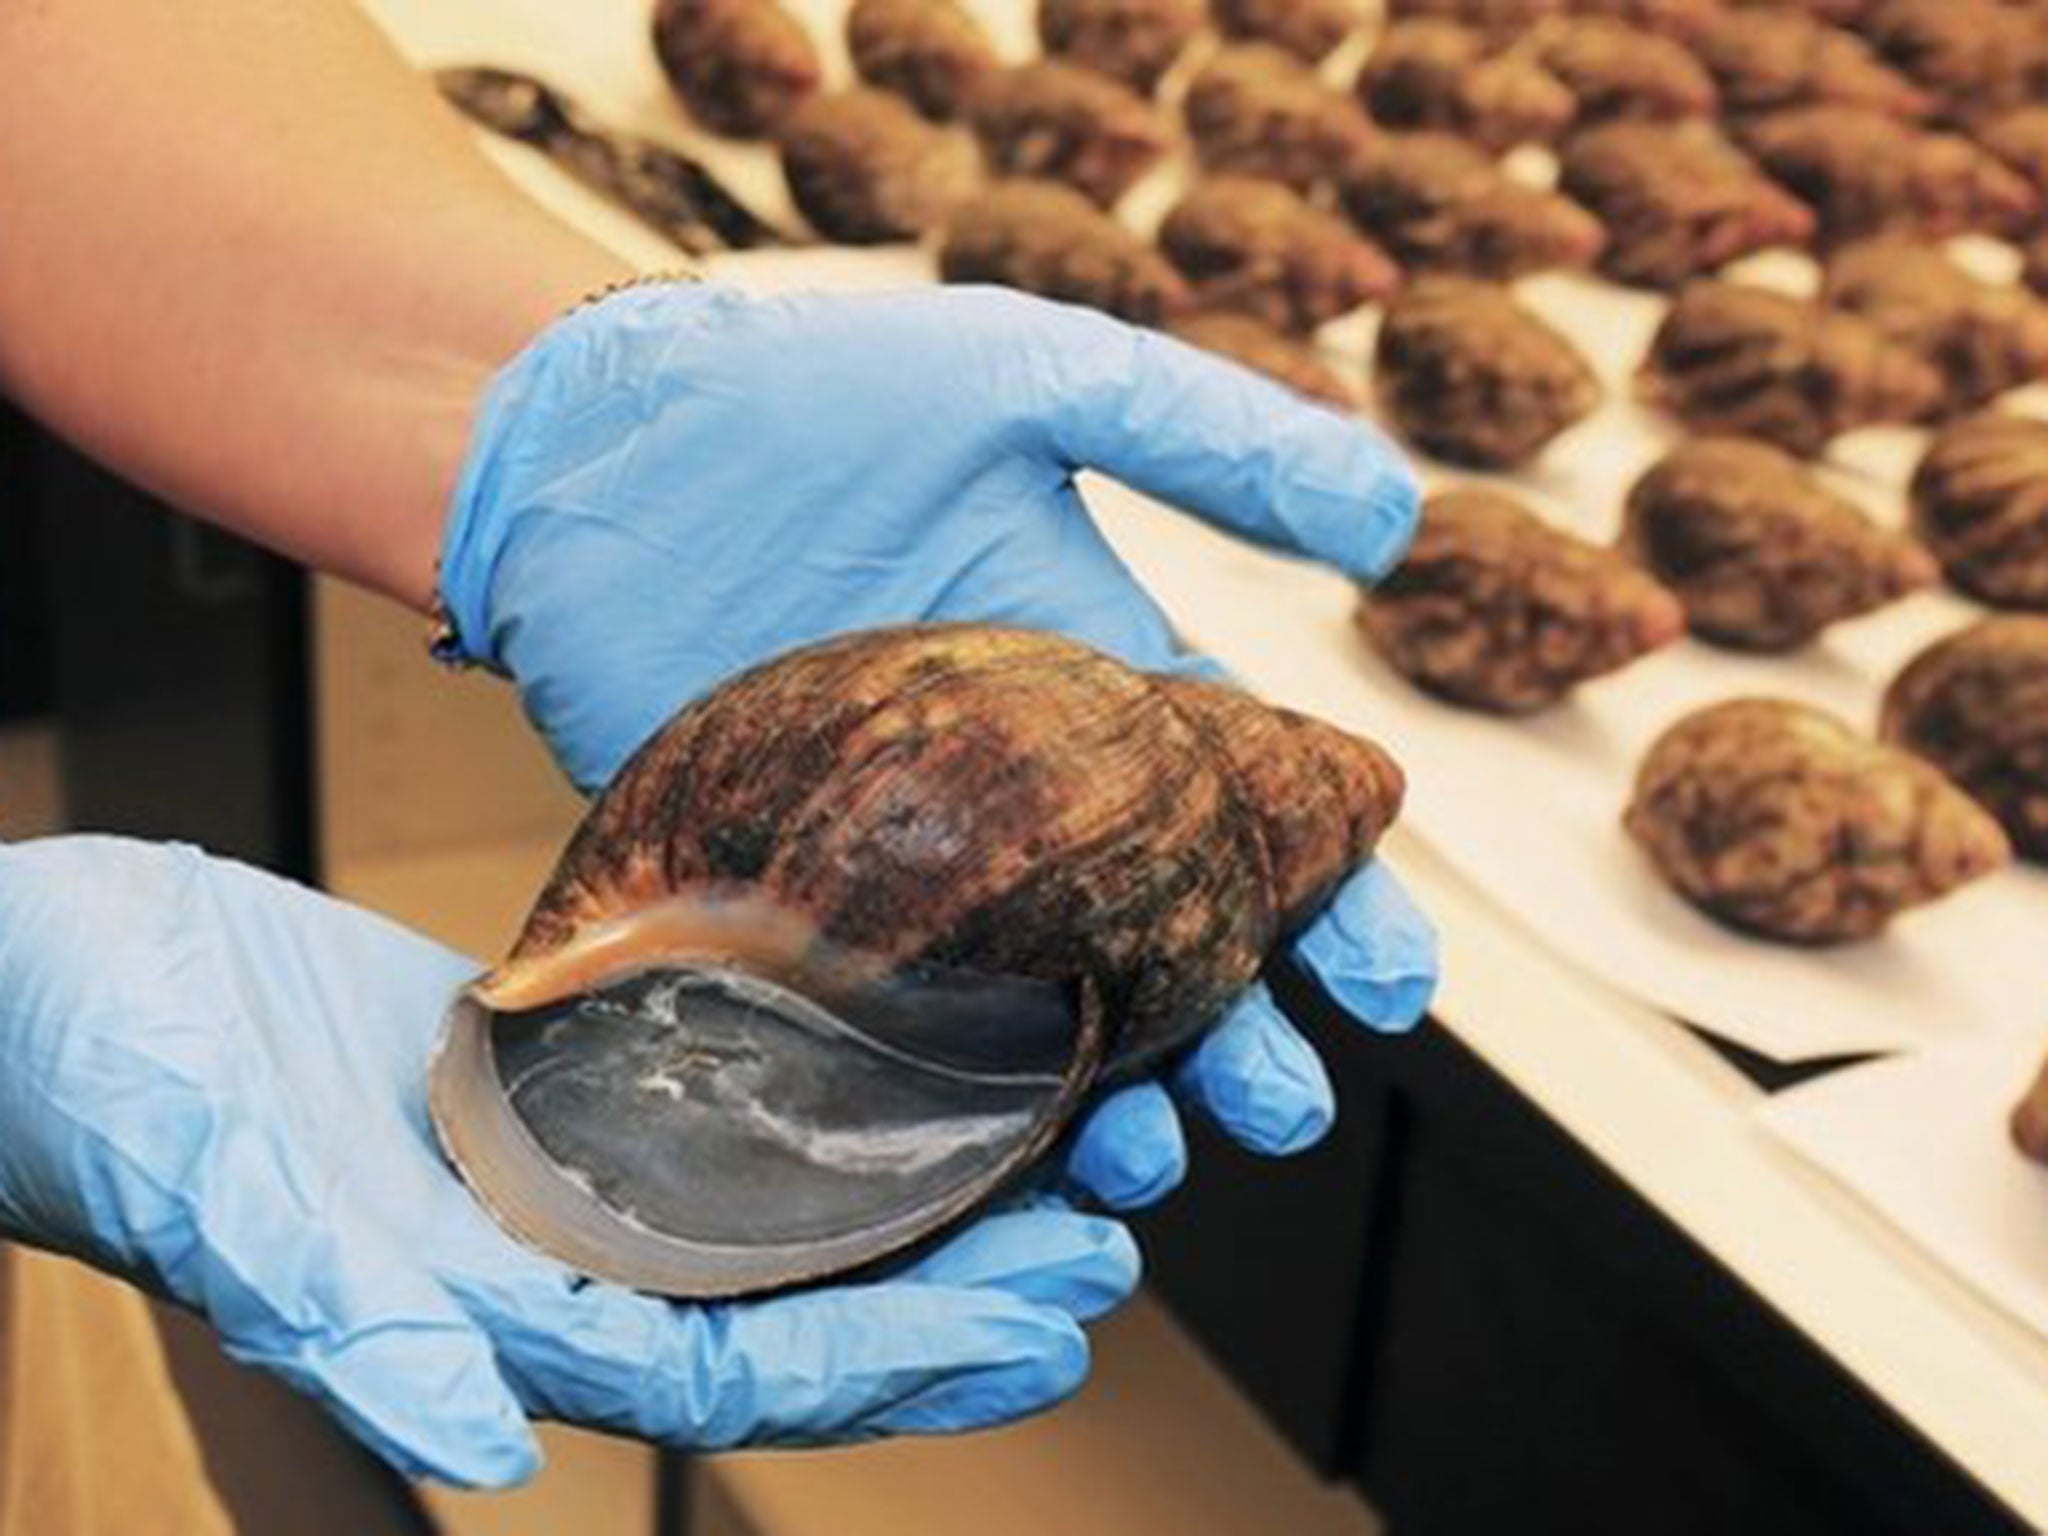 The snails were seized on July 1 at LAX Airport